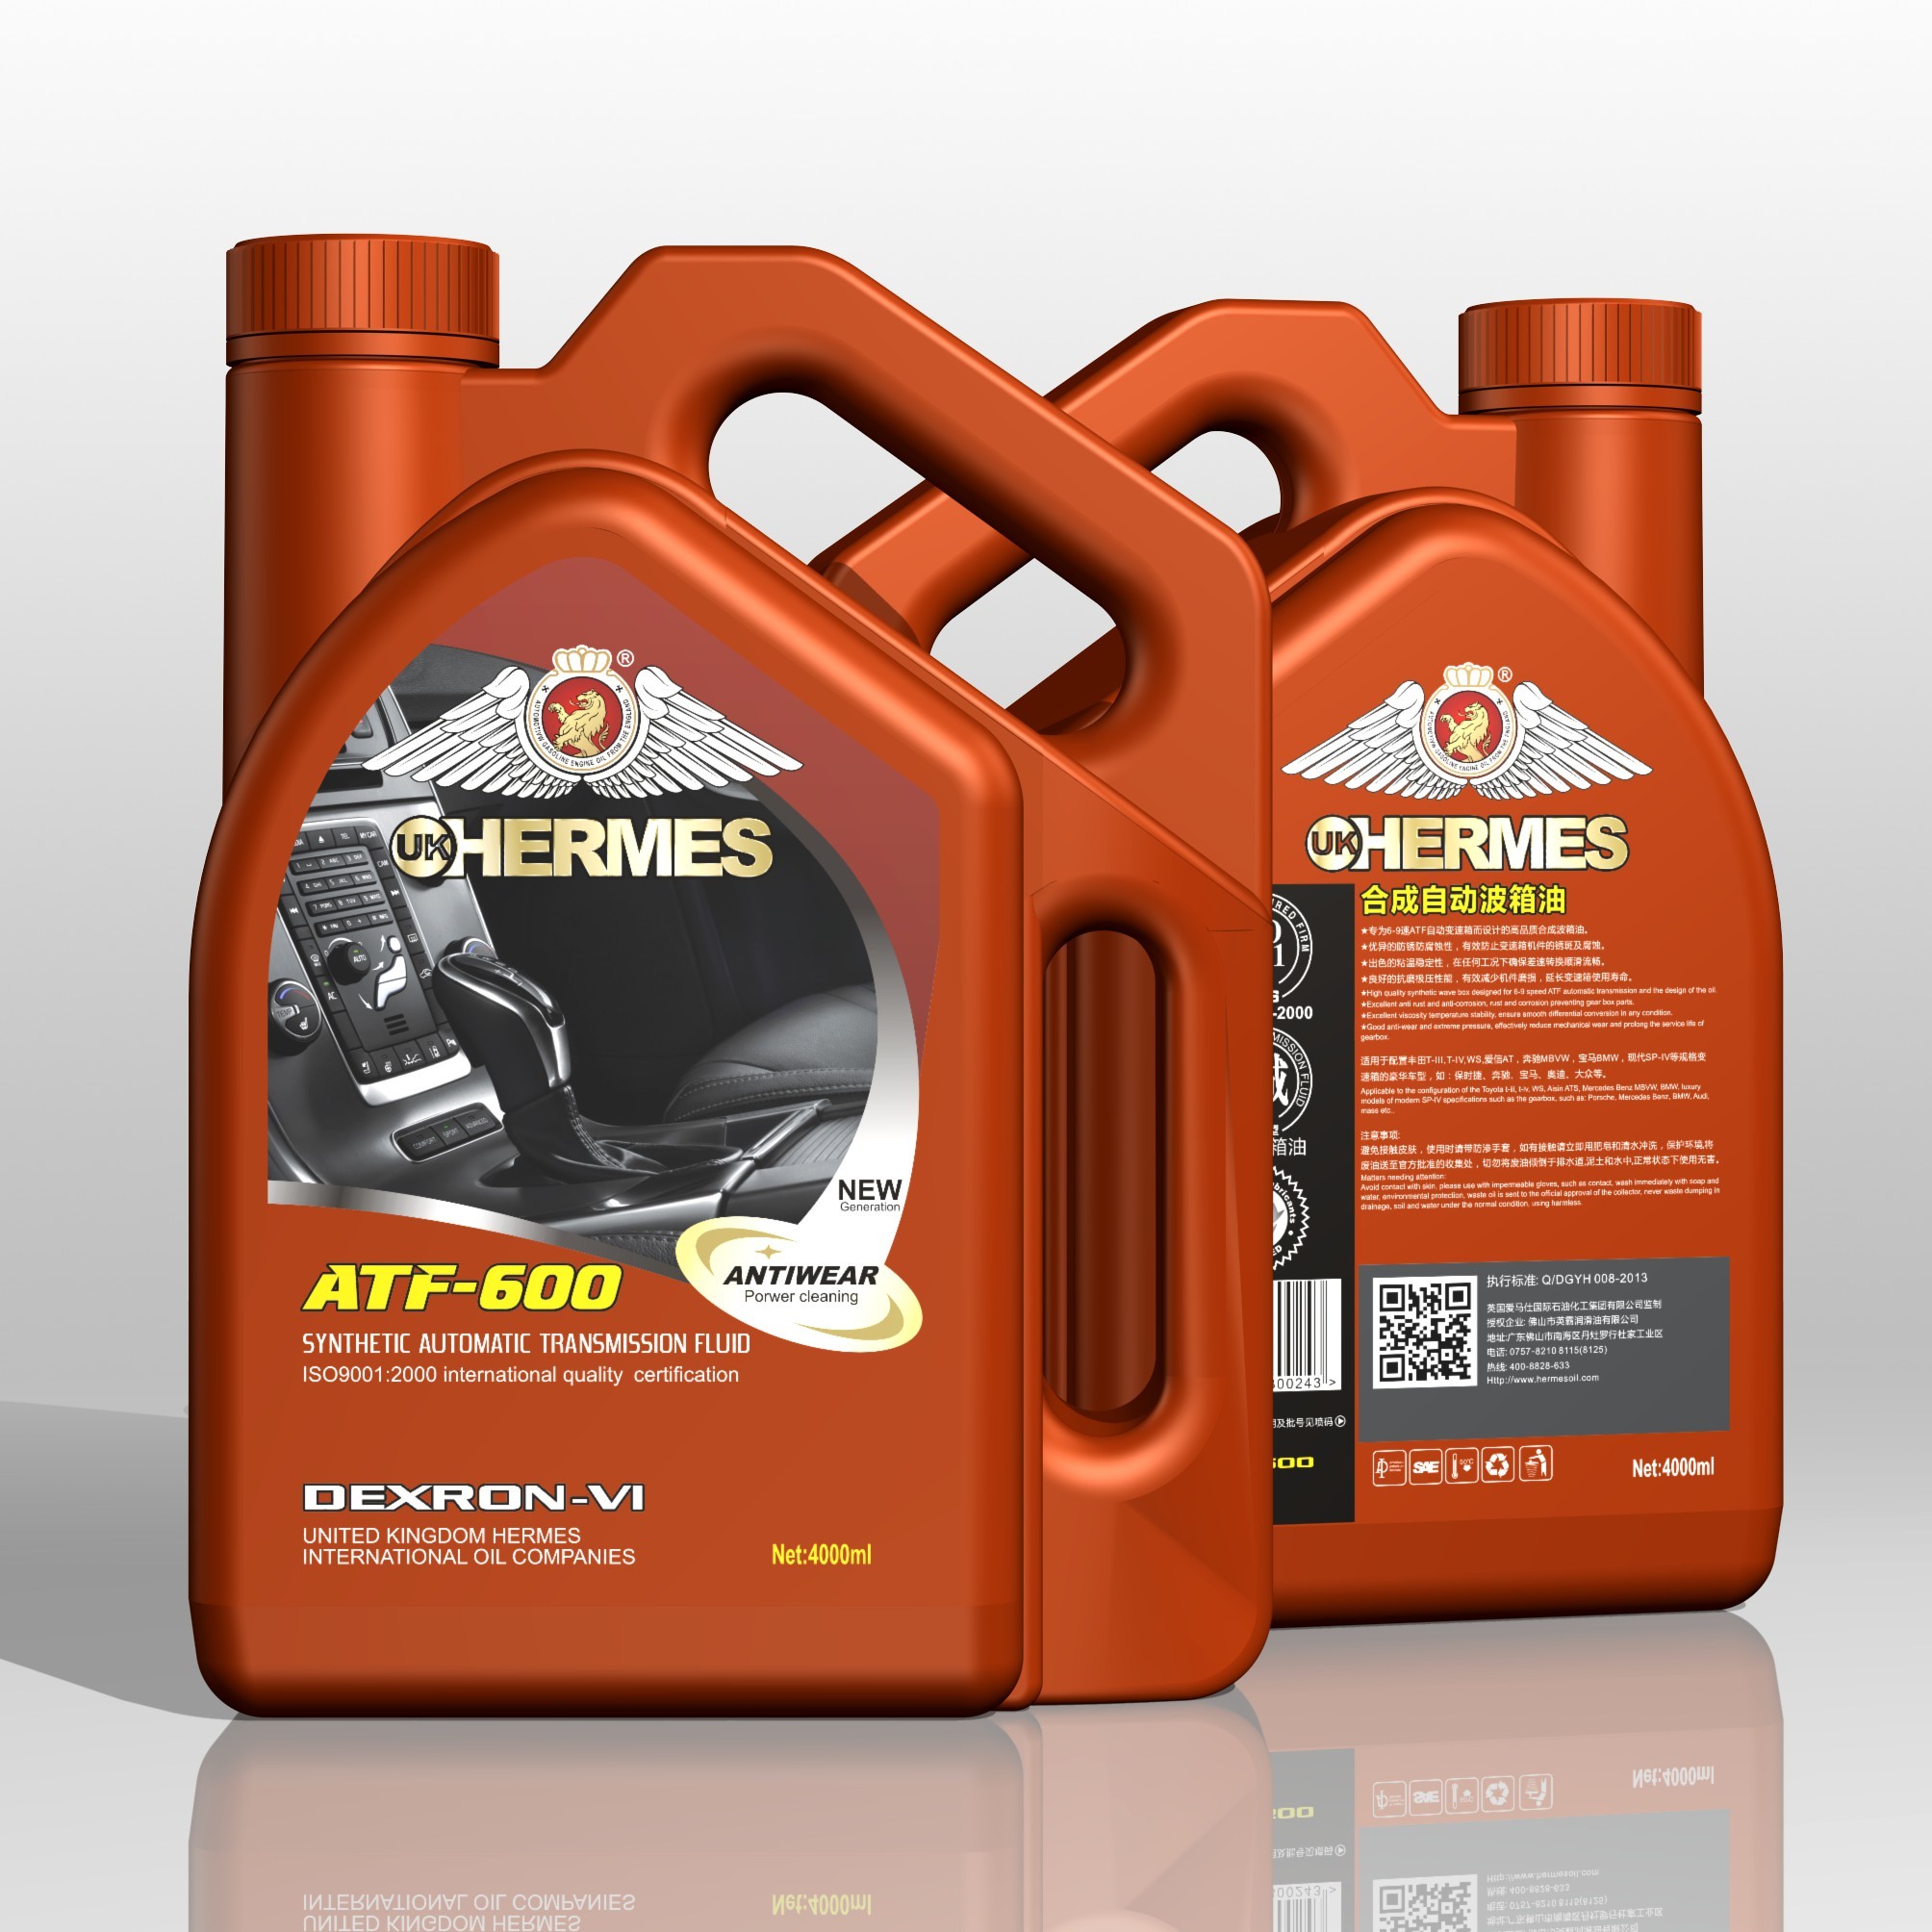 ATF-600 Synthetic Automatic Transmission Fluid